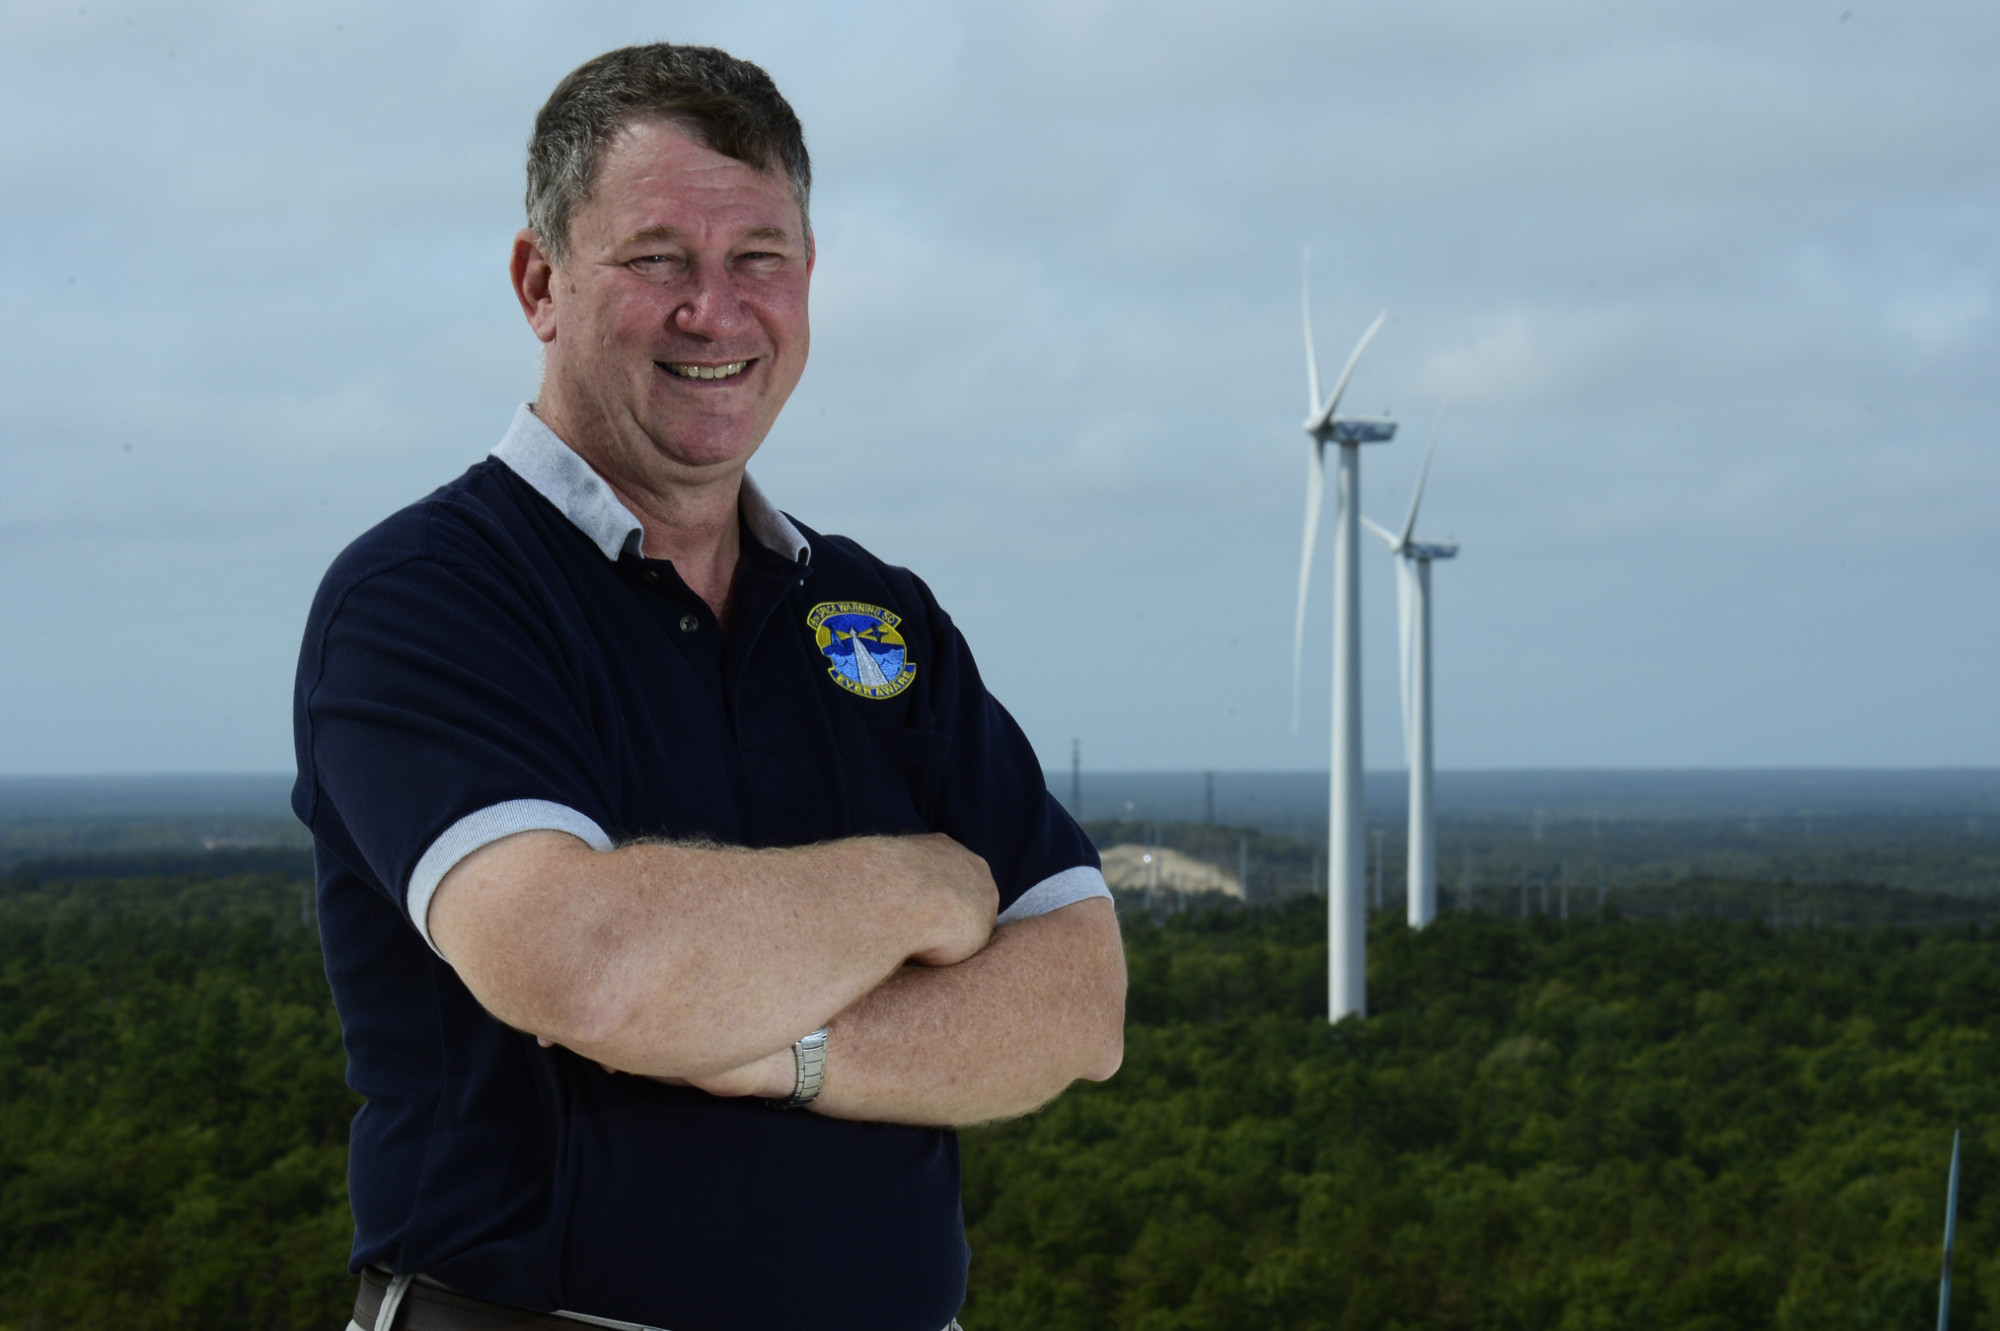 Photo of a man standing in front of two wind turbines in the distance.